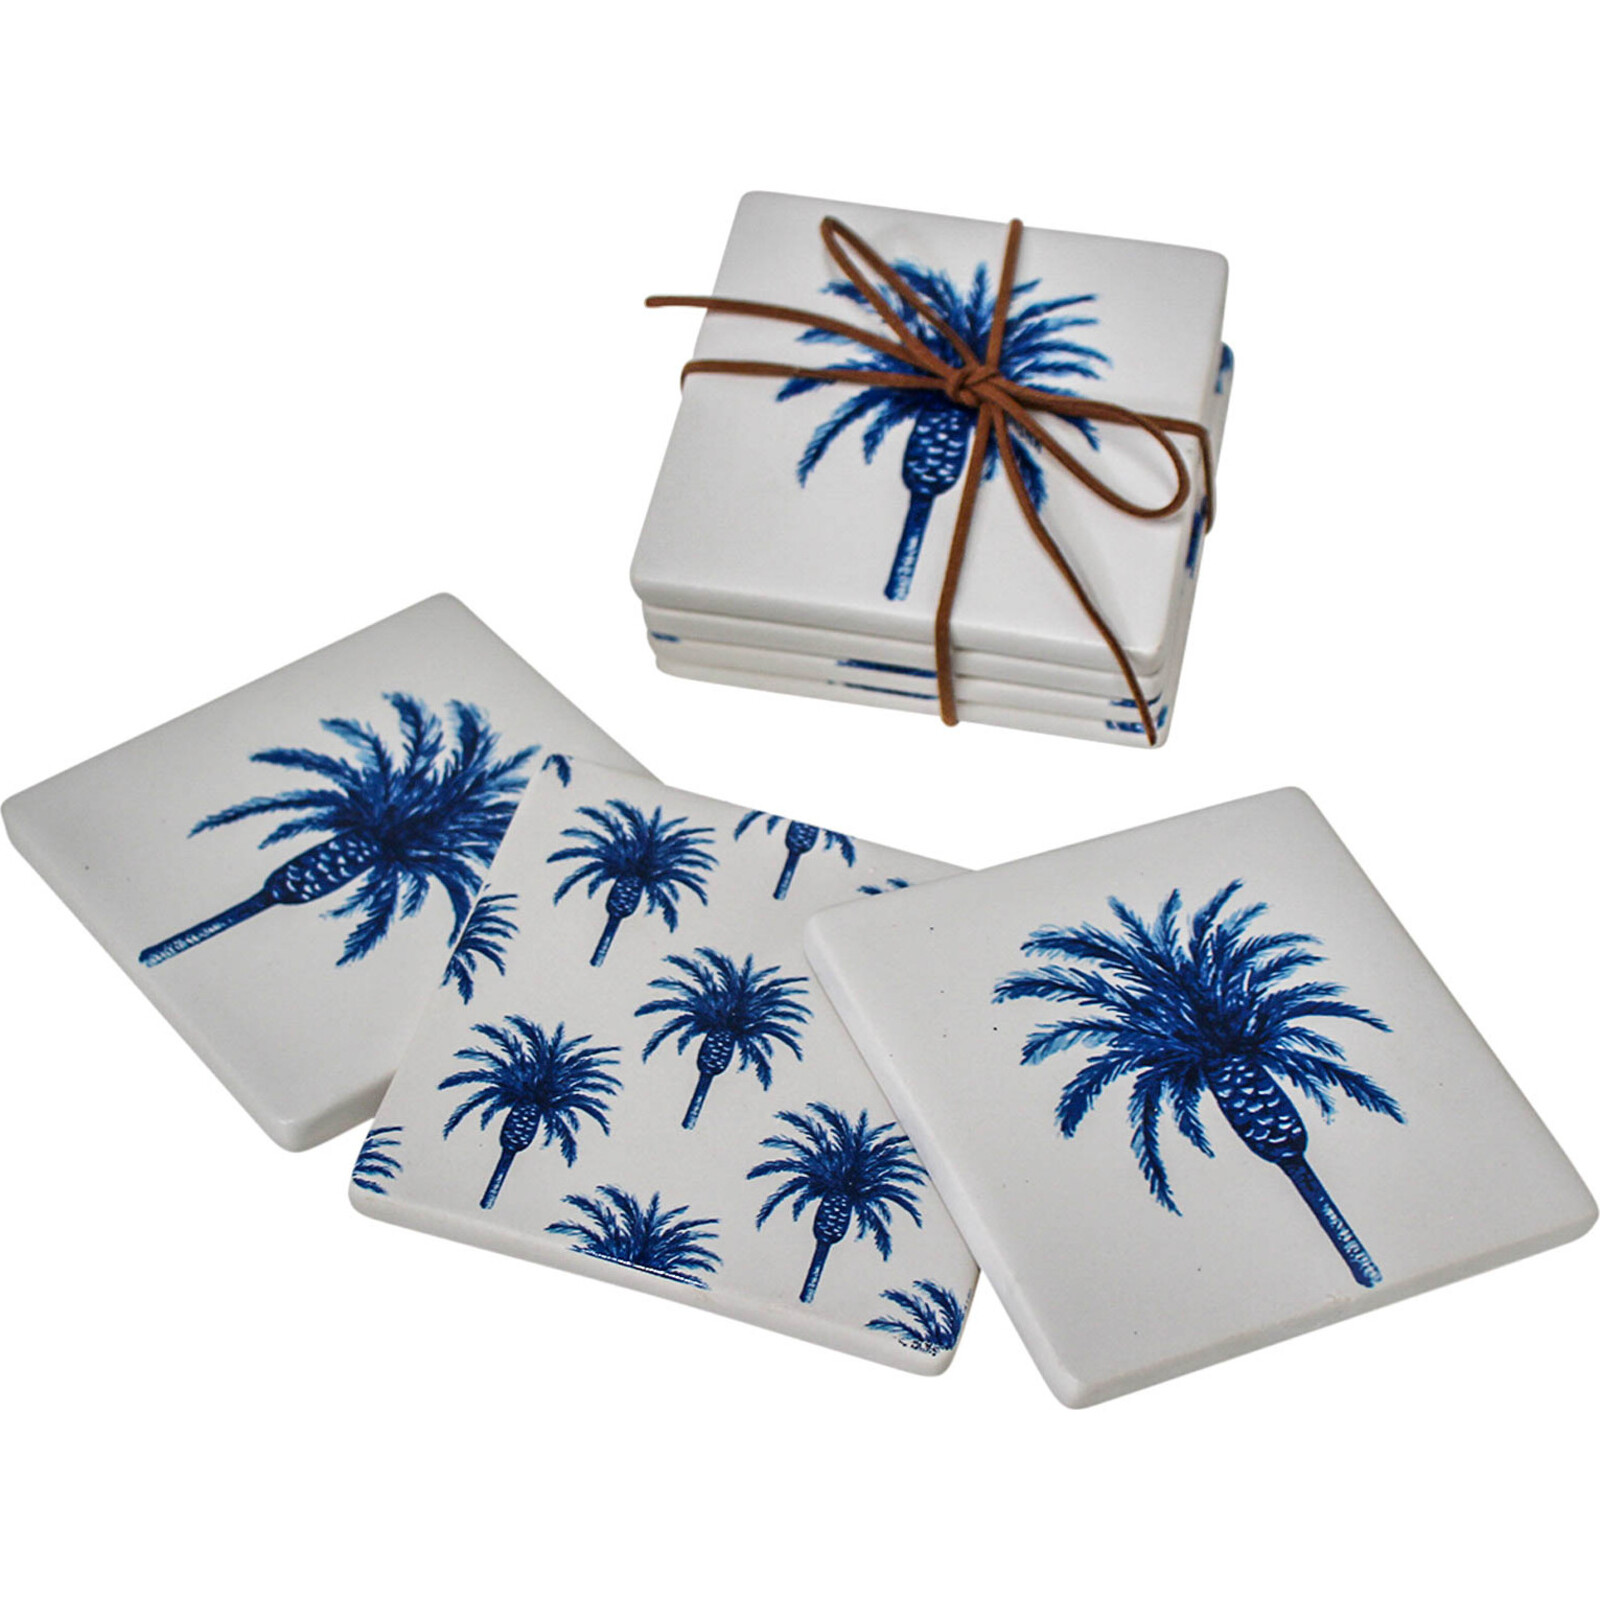 Coasters Date Palm S/4